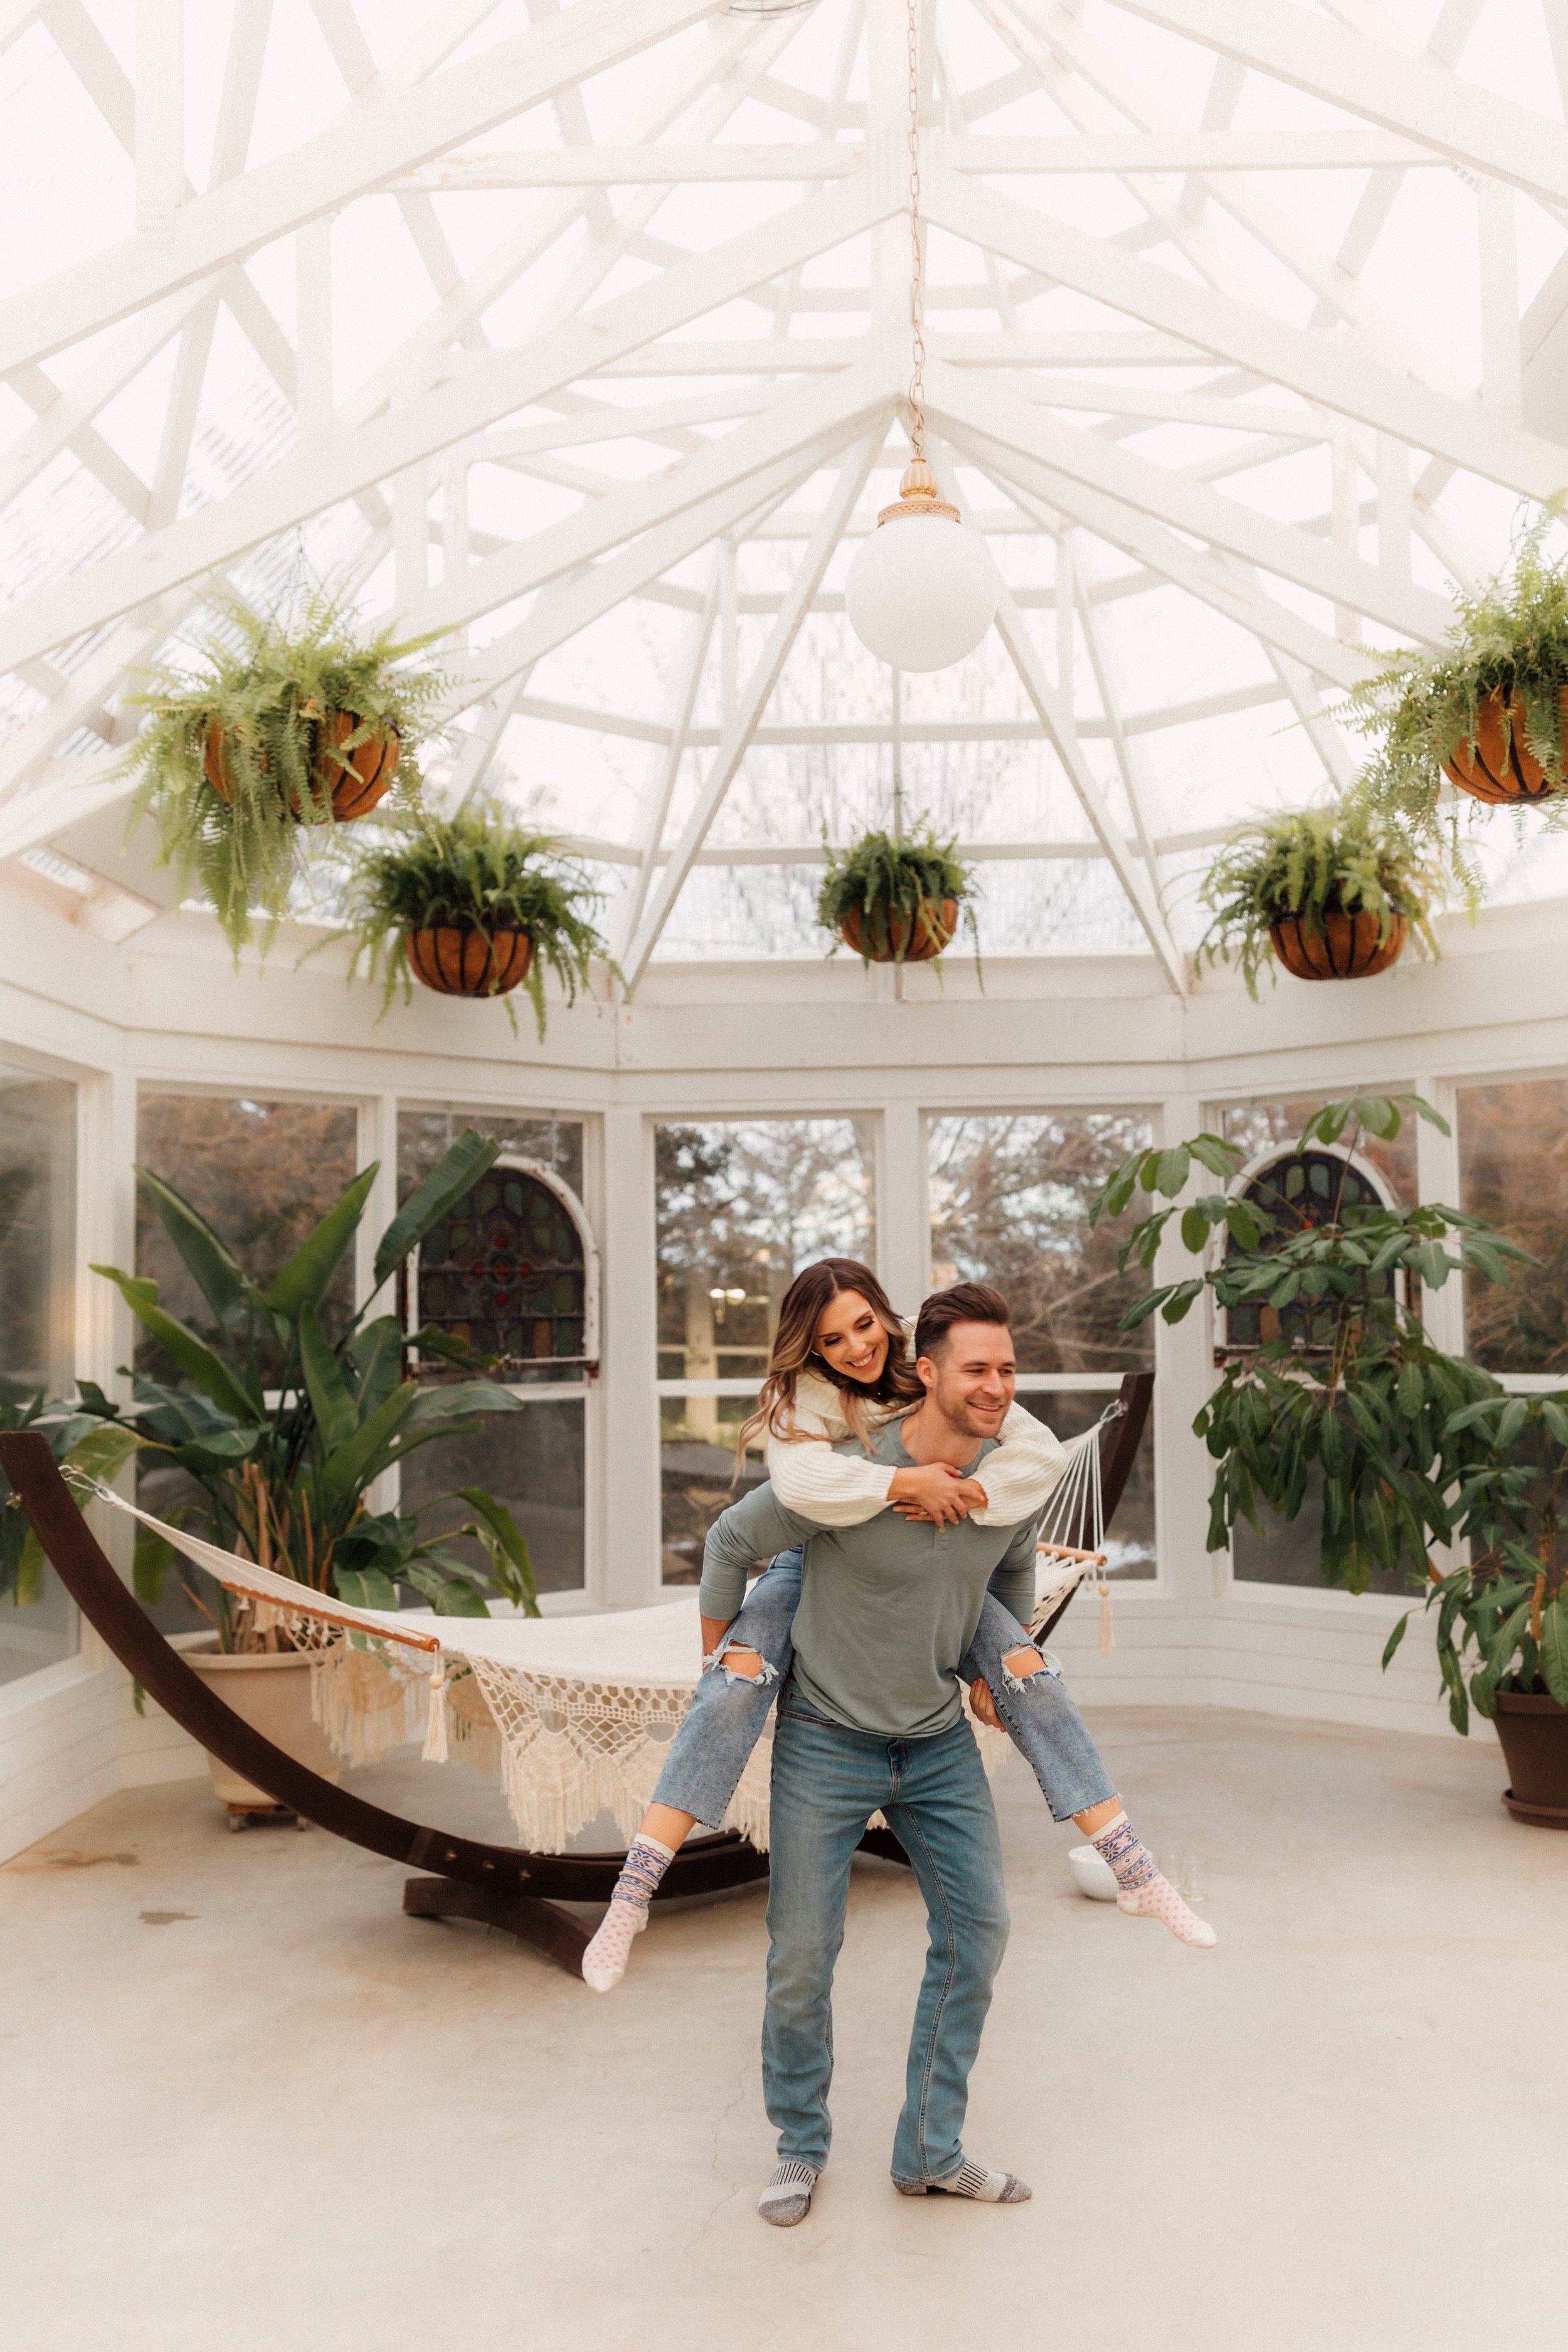 Laura_Ben_Engagment_Session_Winterset_Des_moines_Iowa_Couples_Photographer_Iris_Aisle_Cabin_Conservatory_Candid_Snow_Day_Winter_KMP_Photography-1340.jpg